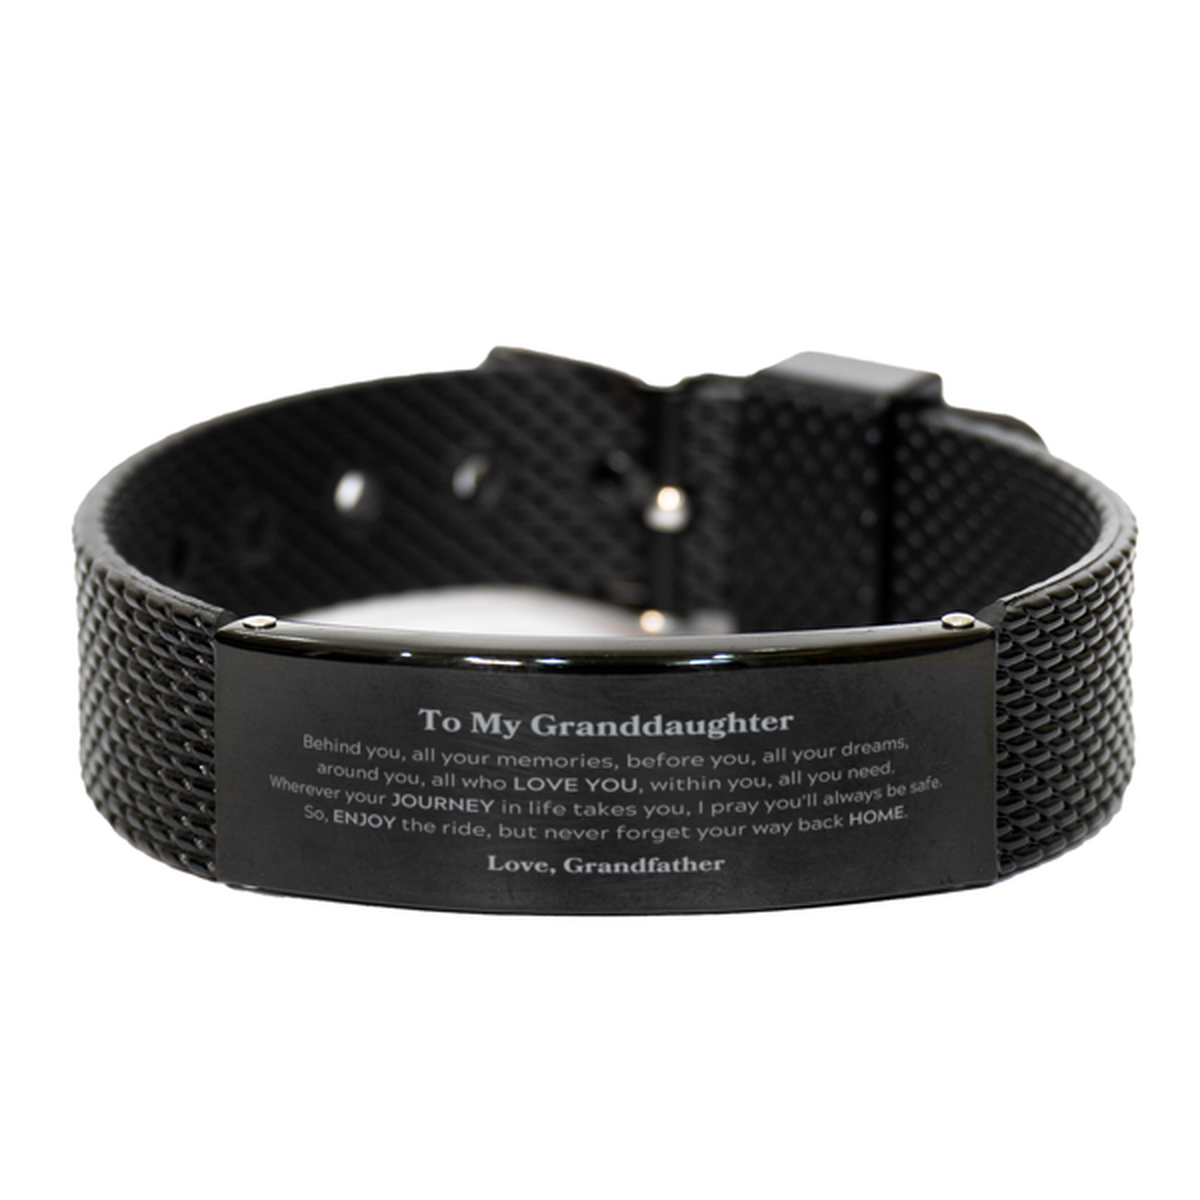 To My Granddaughter Graduation Gifts from Grandfather, Granddaughter Black Shark Mesh Bracelet Christmas Birthday Gifts for Granddaughter Behind you, all your memories, before you, all your dreams. Love, Grandfather